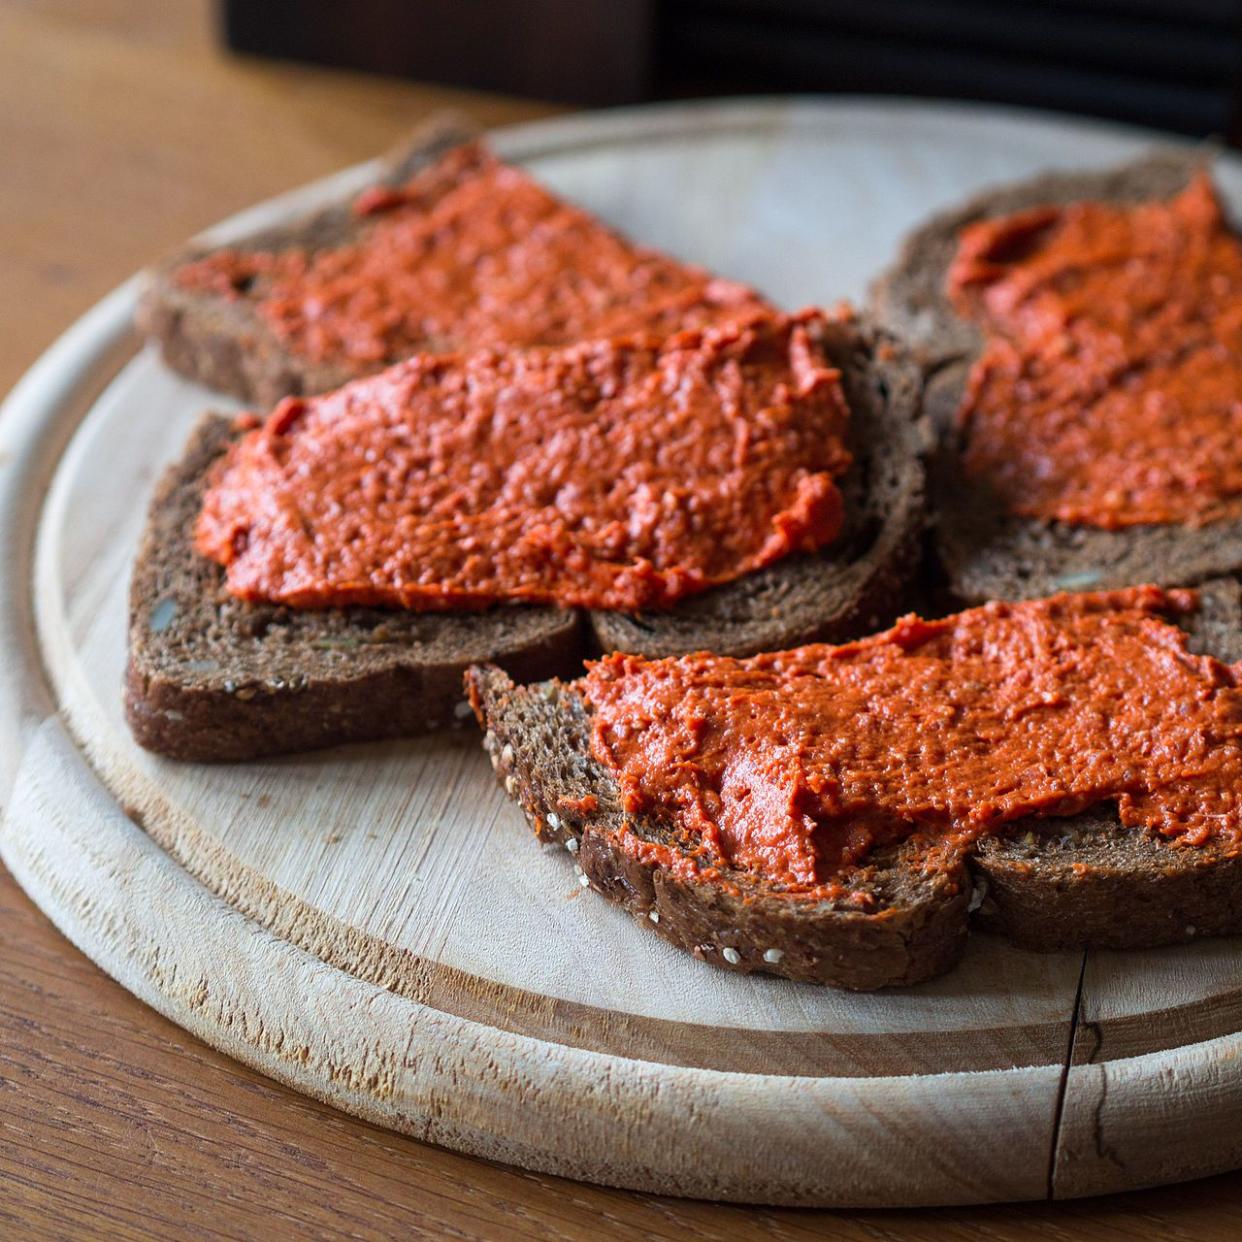 Filet americain is the Dutch version of "steak tartare". Recipes vary but it is usually made with finely ground raw beef, onions, paprika powder, pepper, capers, tobasco, and often also mayonnaise. It is commonly eaten on bread or with toasts.